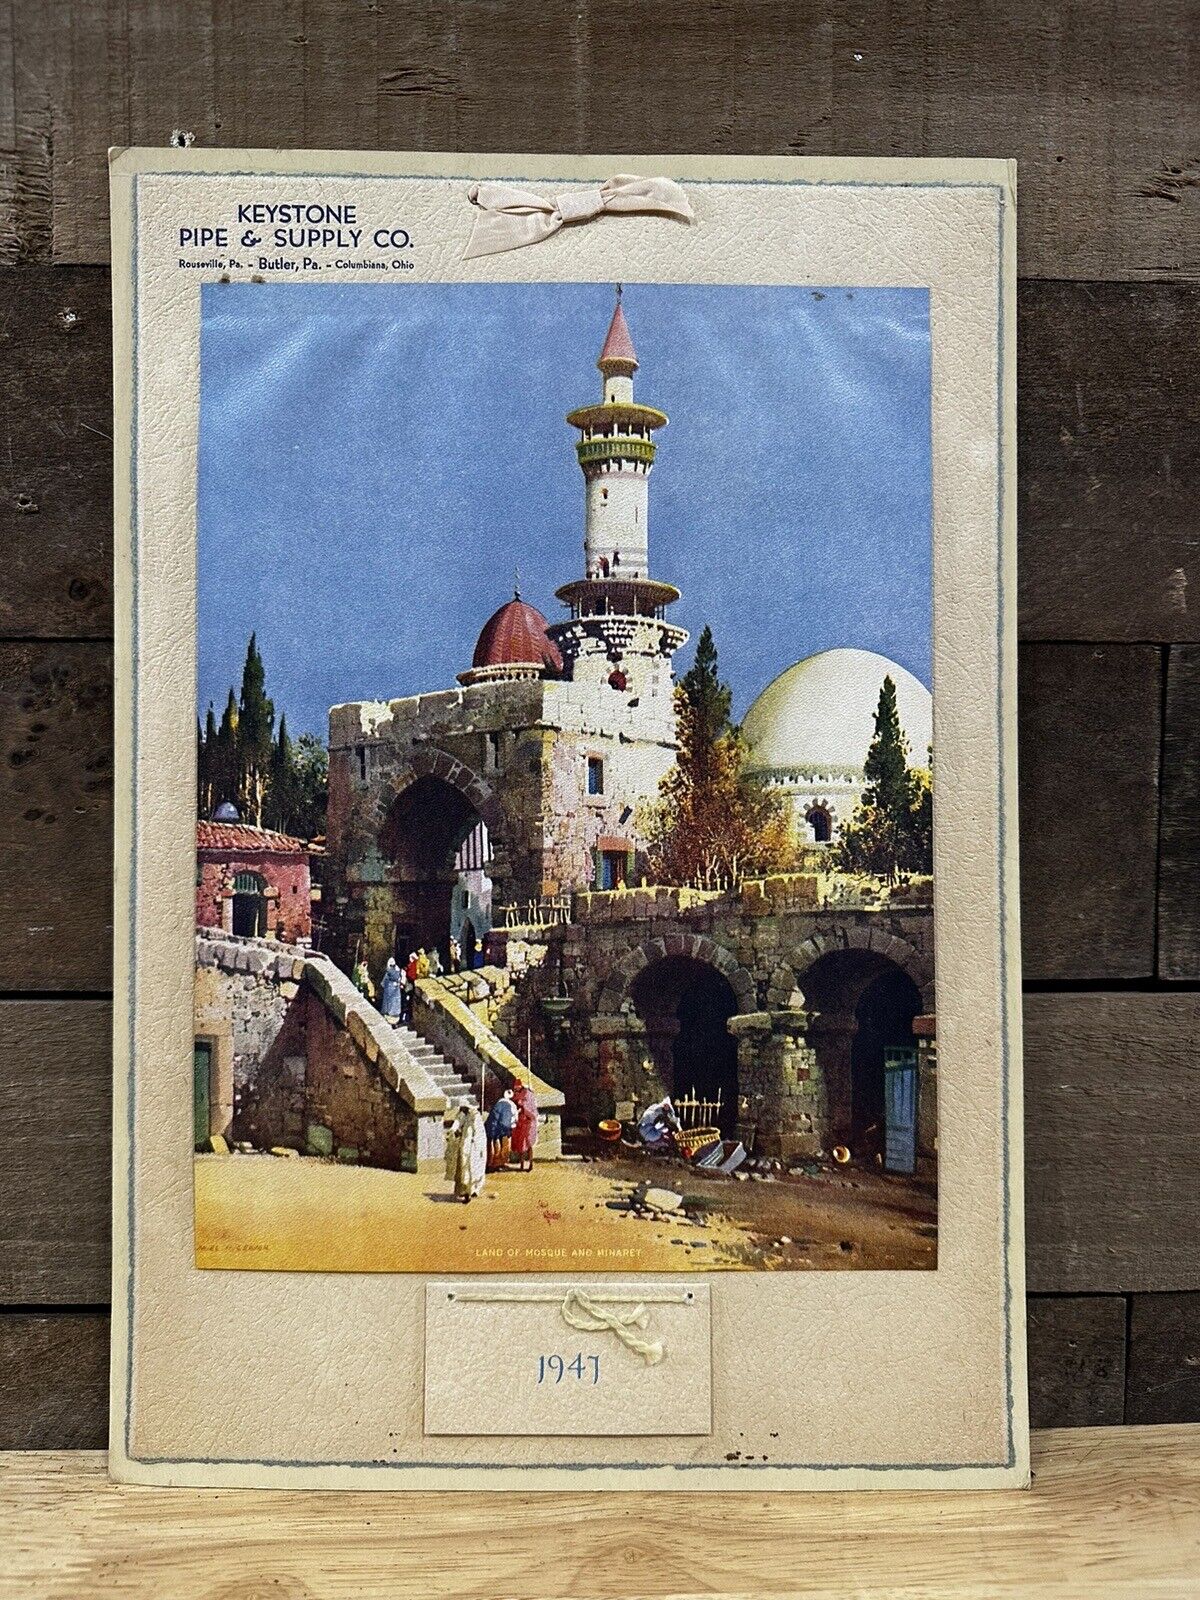 Vintage 1947 Keystone Pipe & Supply Co. Calendar “Land Of Mosque And Minaret”